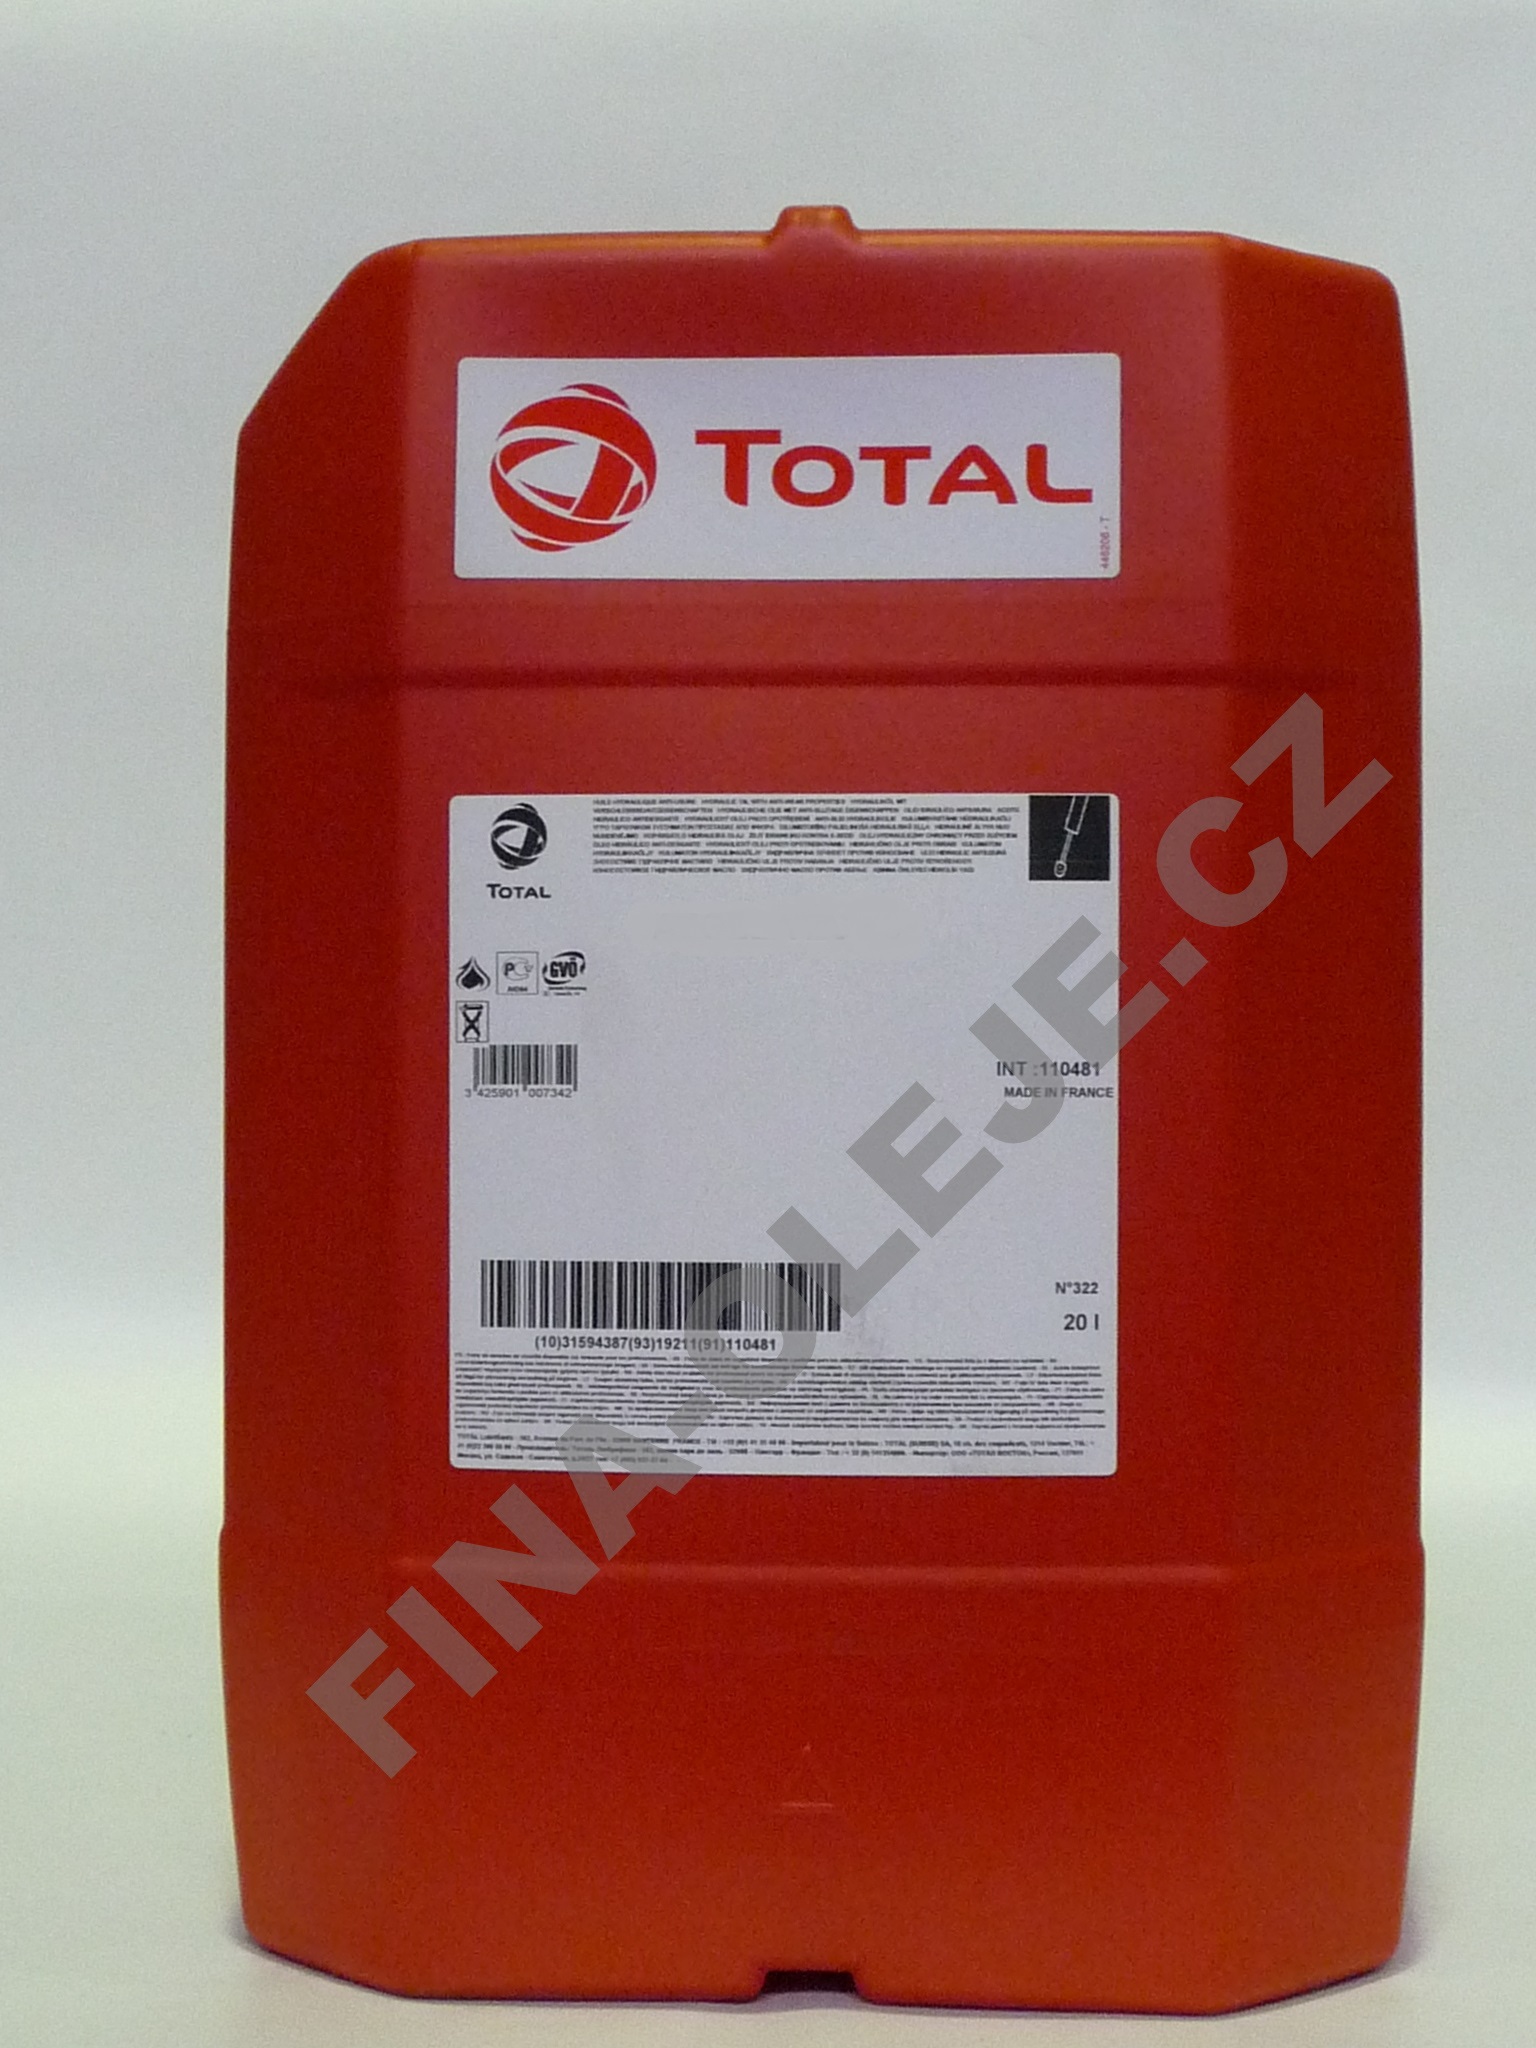 TOTAL CARTER SY 320 - 20 L